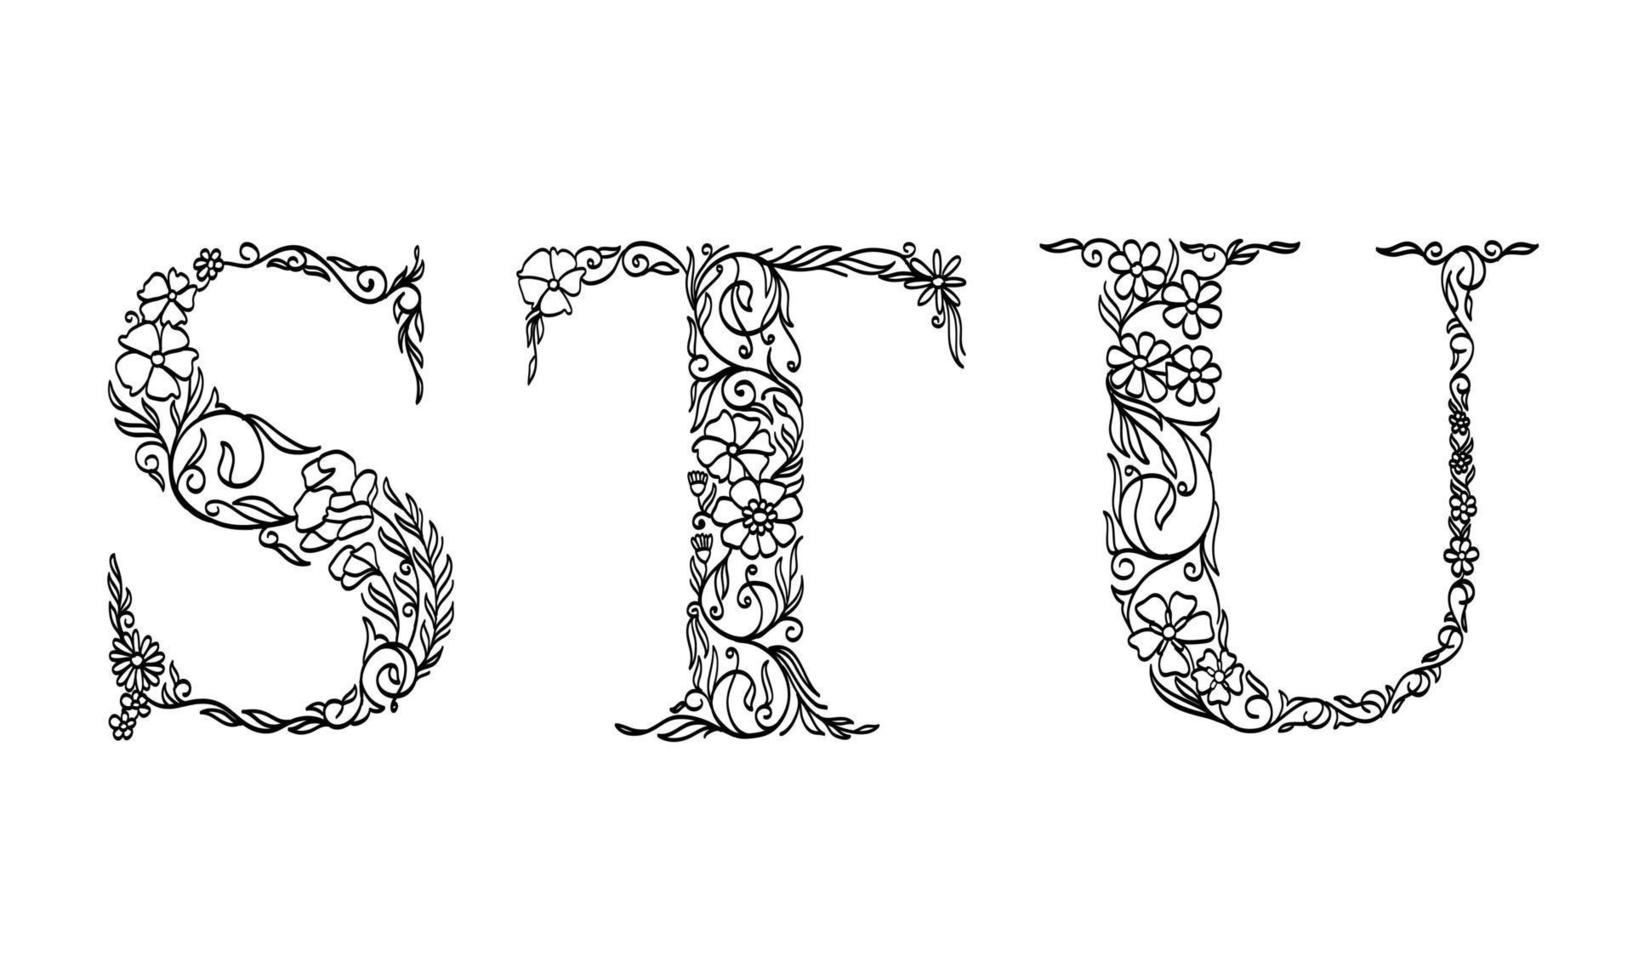 floral illustration alphabet s, t, u, vector graphic font made by flower and leaf plant creative hand drawn line art for abstract and natural nature style looks in unique monochrome design decoration